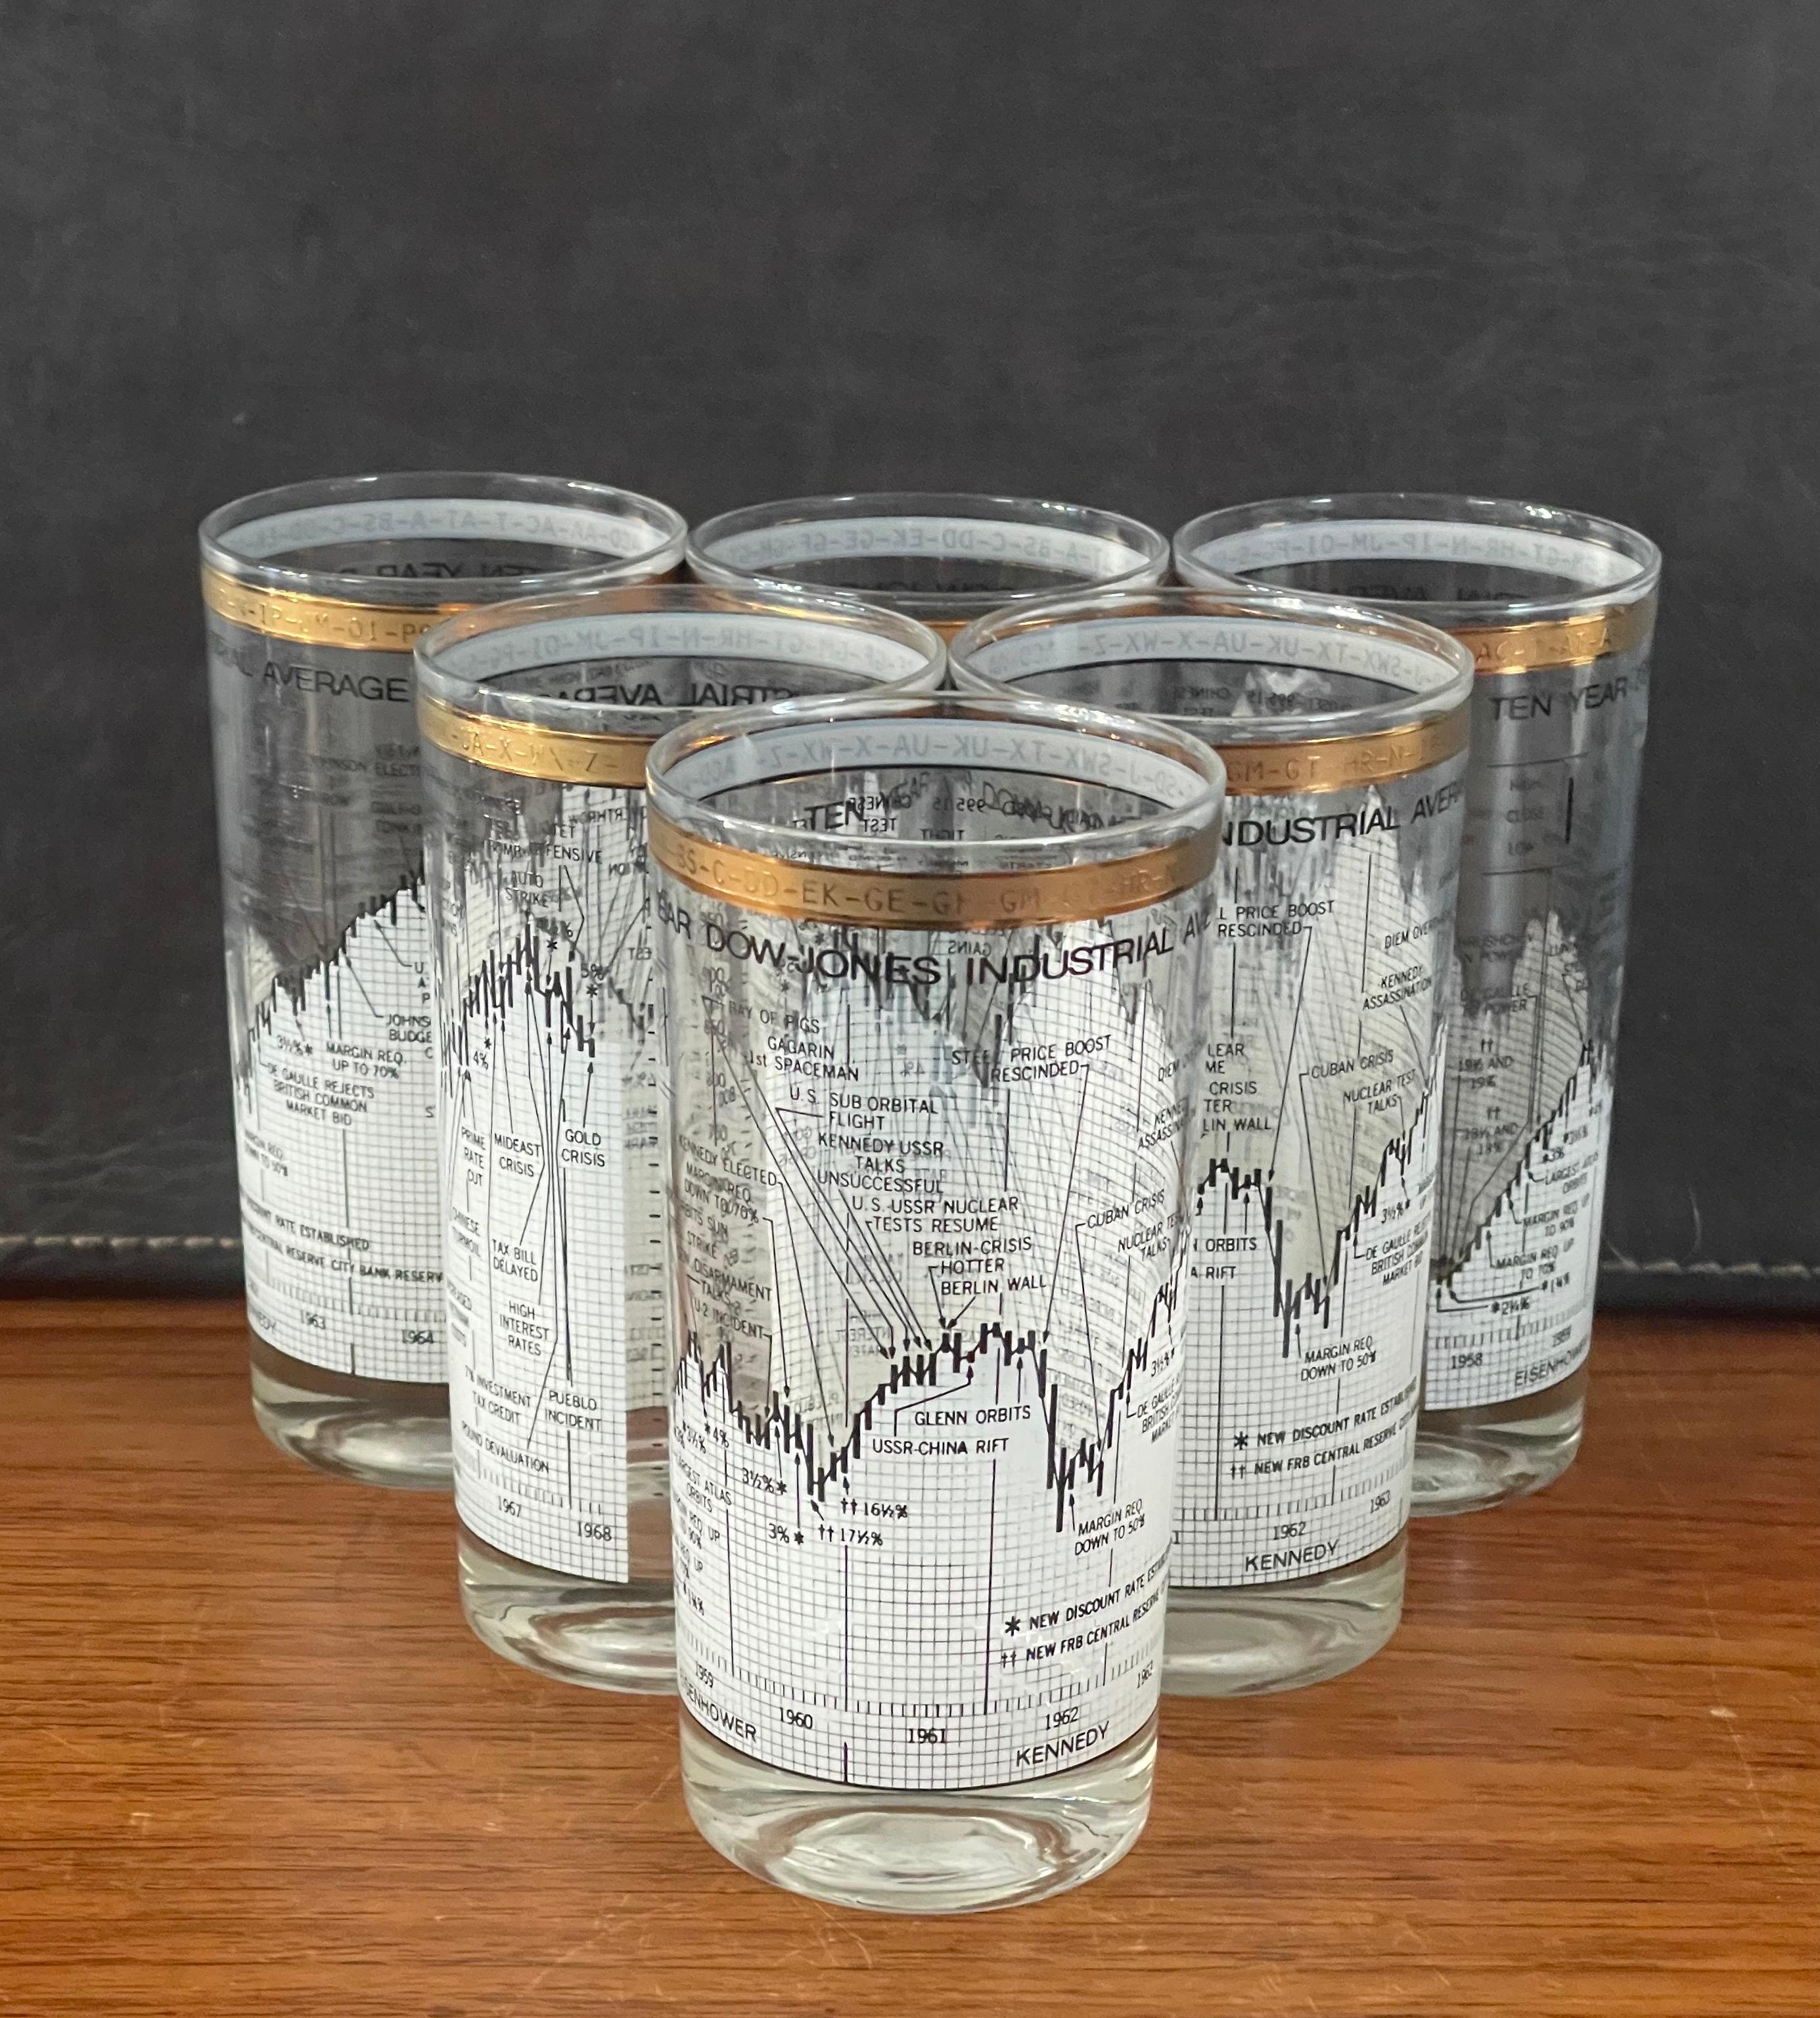 Great set of six tall high ball glasses (12oz) tracking the Dow Jones Industrial Average (DJIA) by Cera, circa 1970s. Each glass captures 10 years (from 1958 to 1968) of current events and their impact on the stock market. A gold band along the top